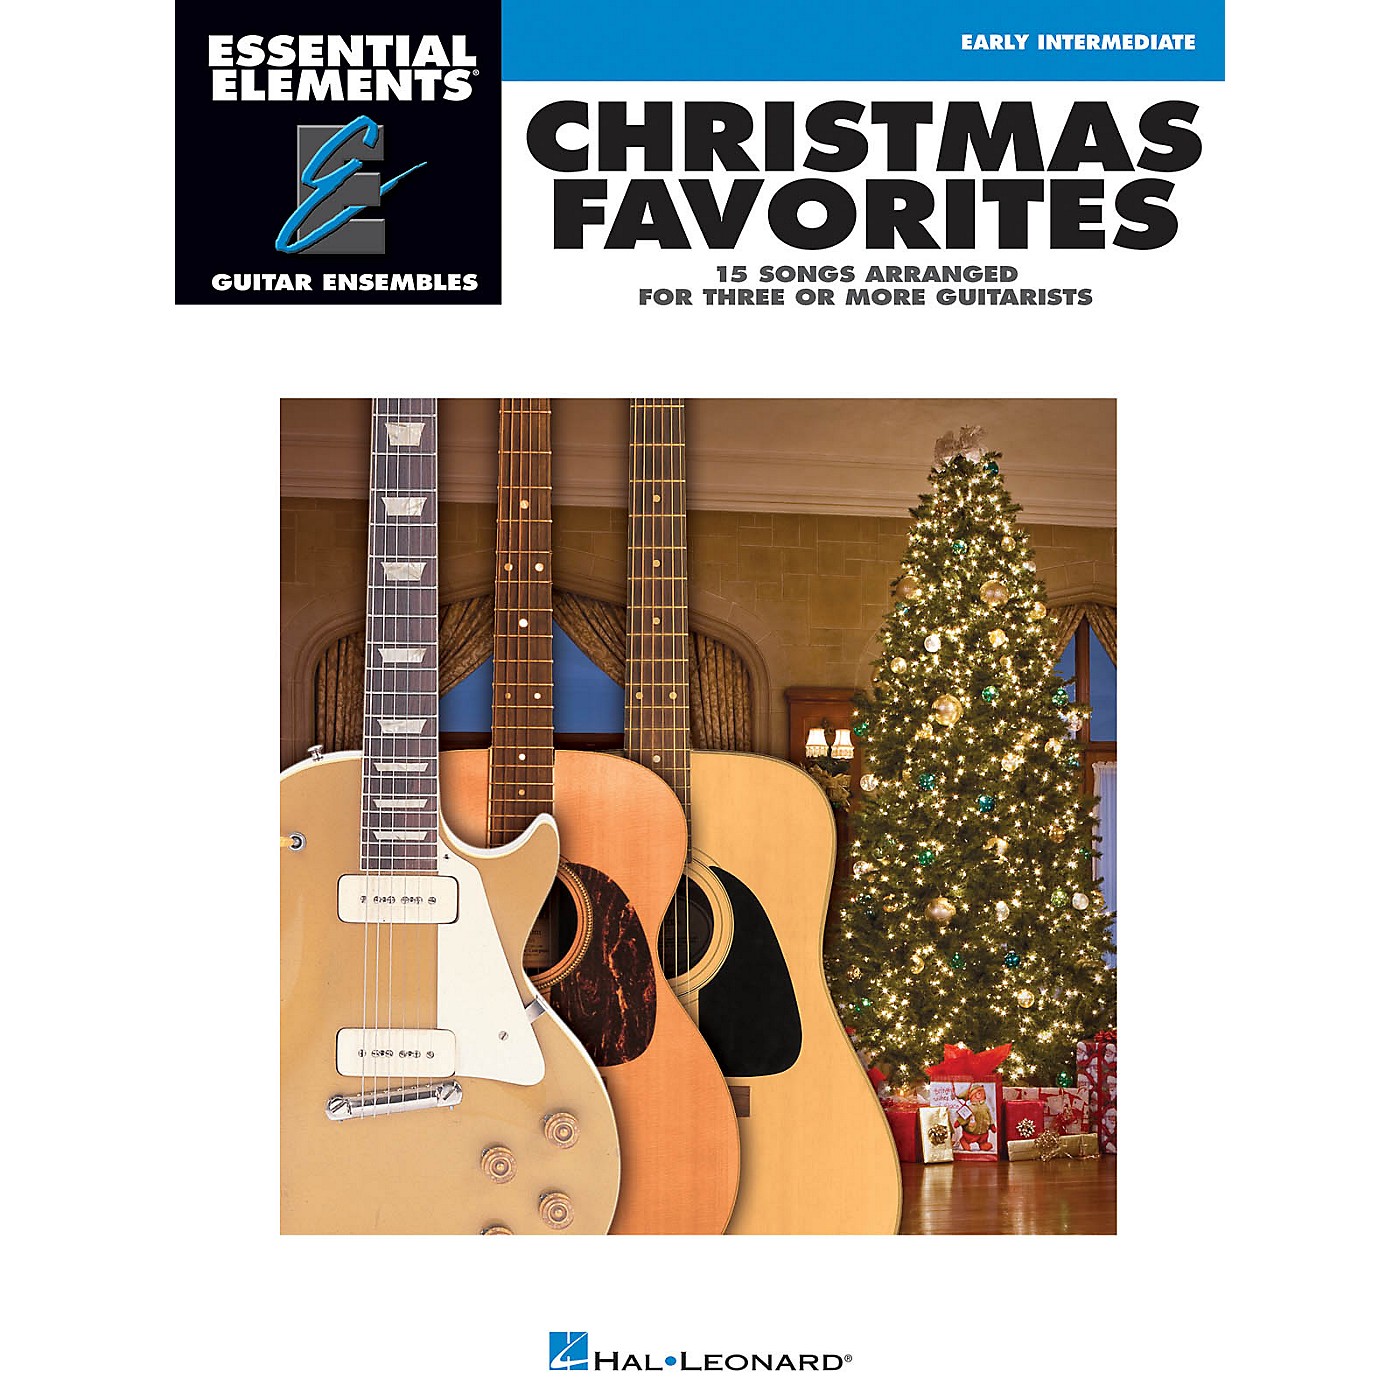 Hal Leonard Christmas Favorites Essential Elements Guitar Series Softcover thumbnail